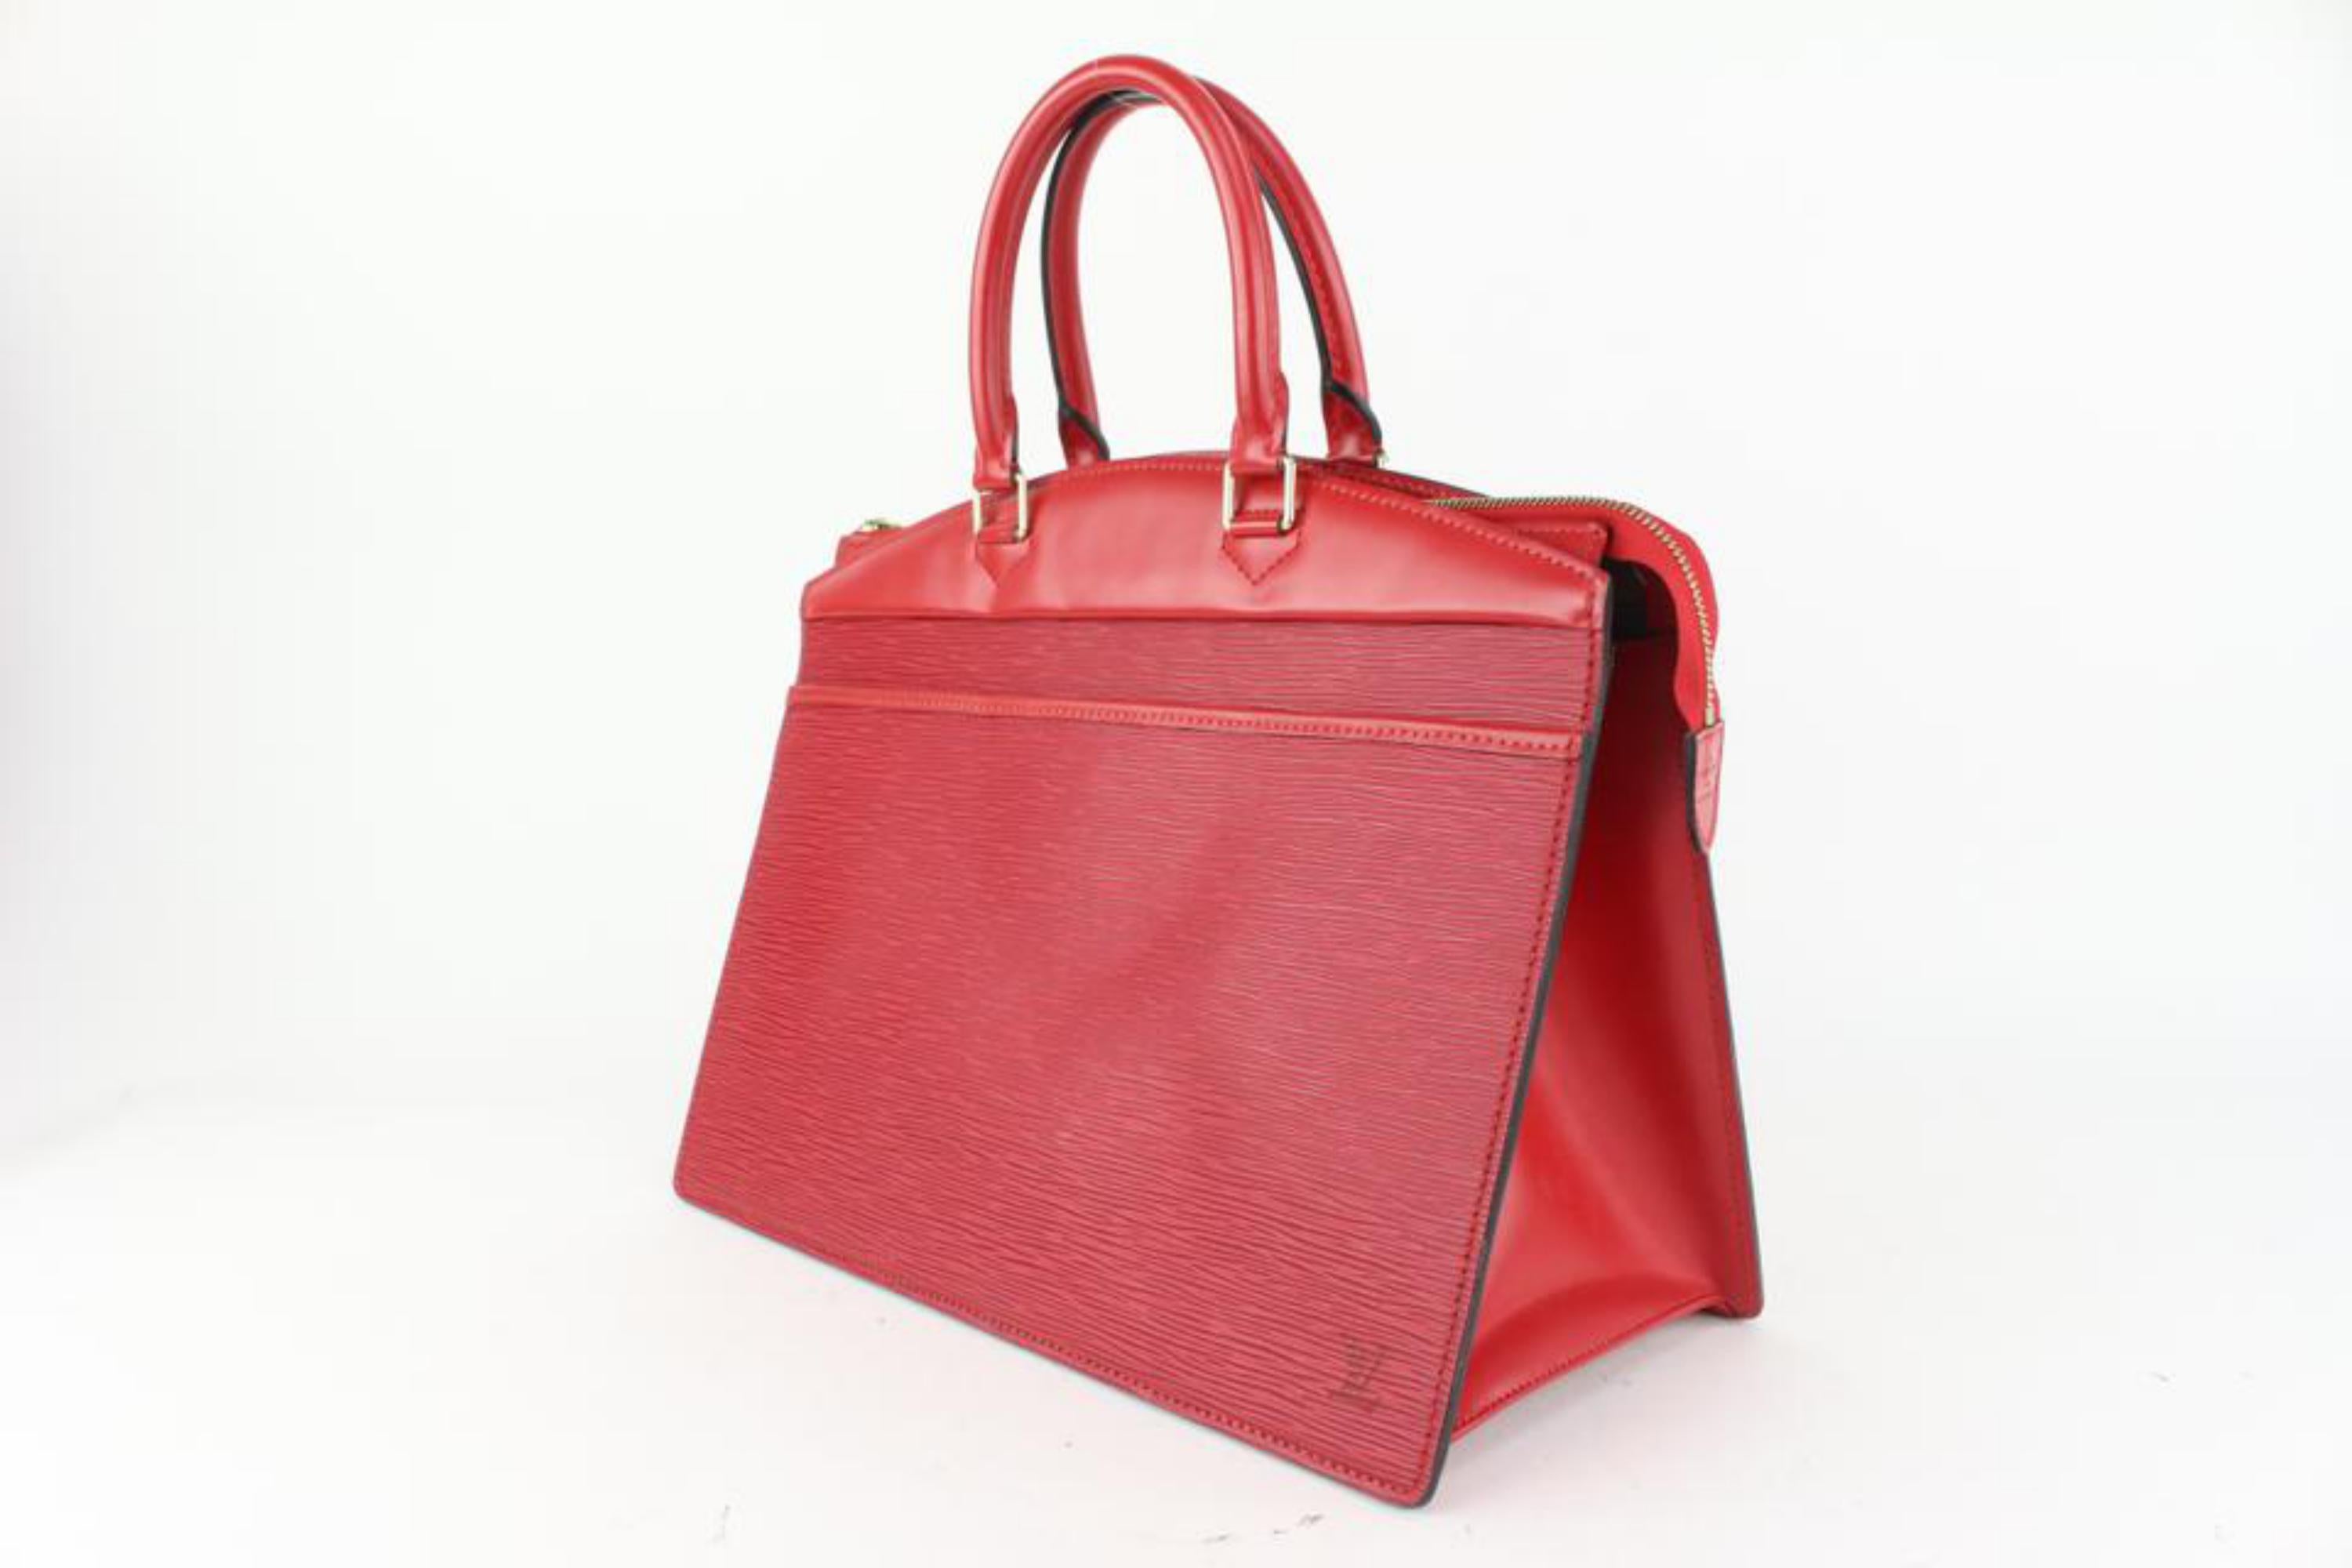 Louis Vuitton Red Epi Leather Riviera Vanity Tote Bag 5L91a1 7